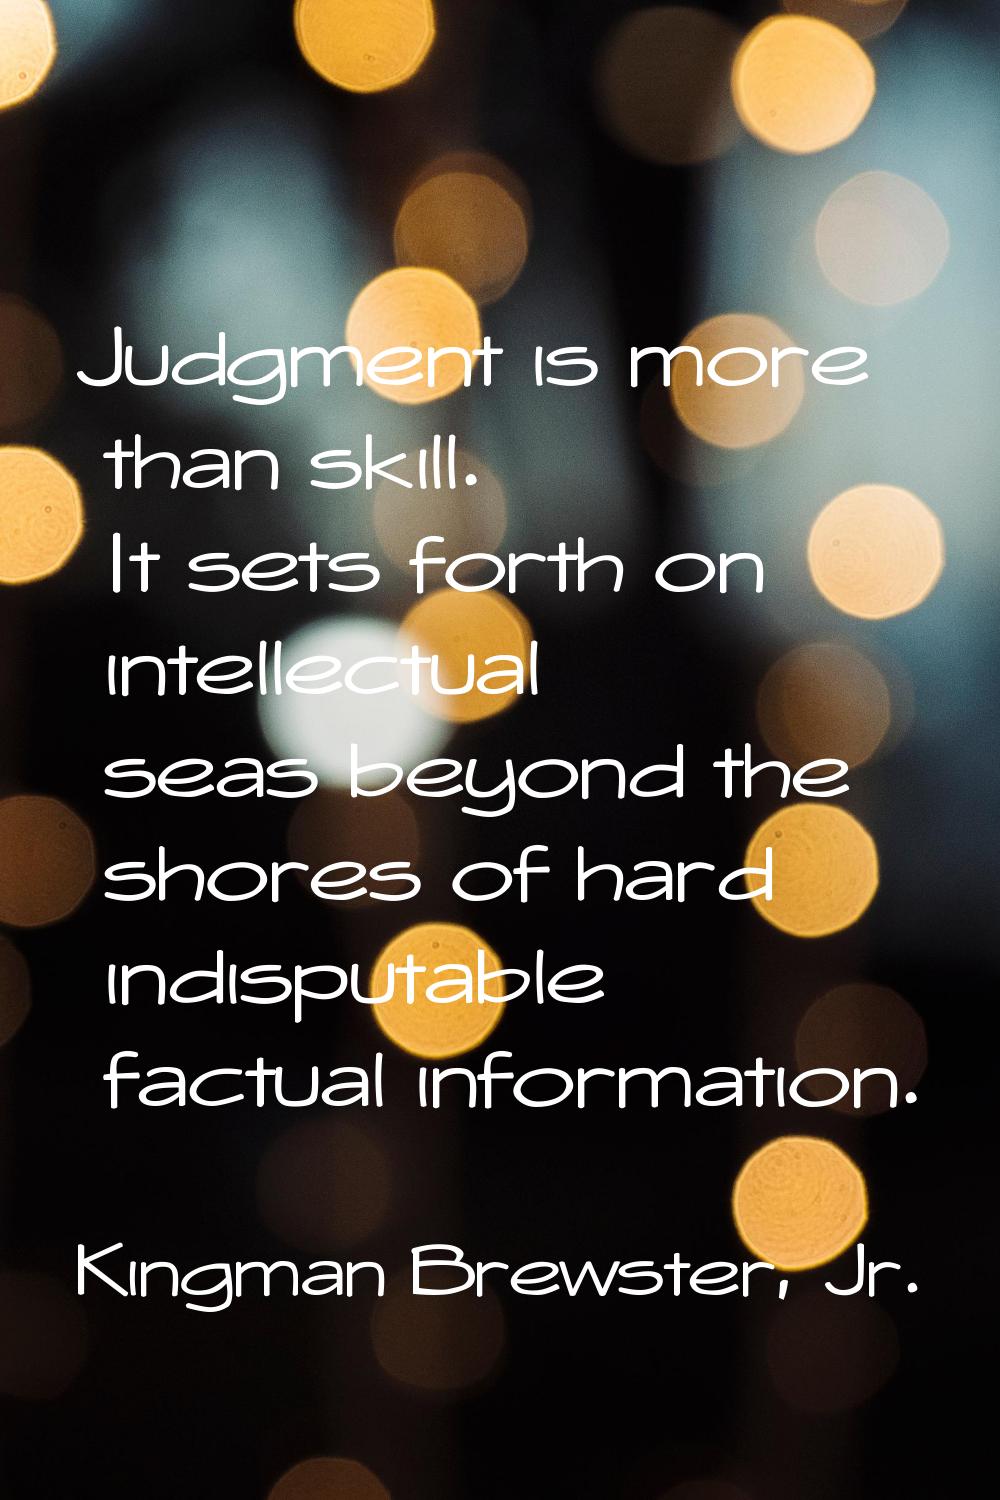 Judgment is more than skill. It sets forth on intellectual seas beyond the shores of hard indisputa